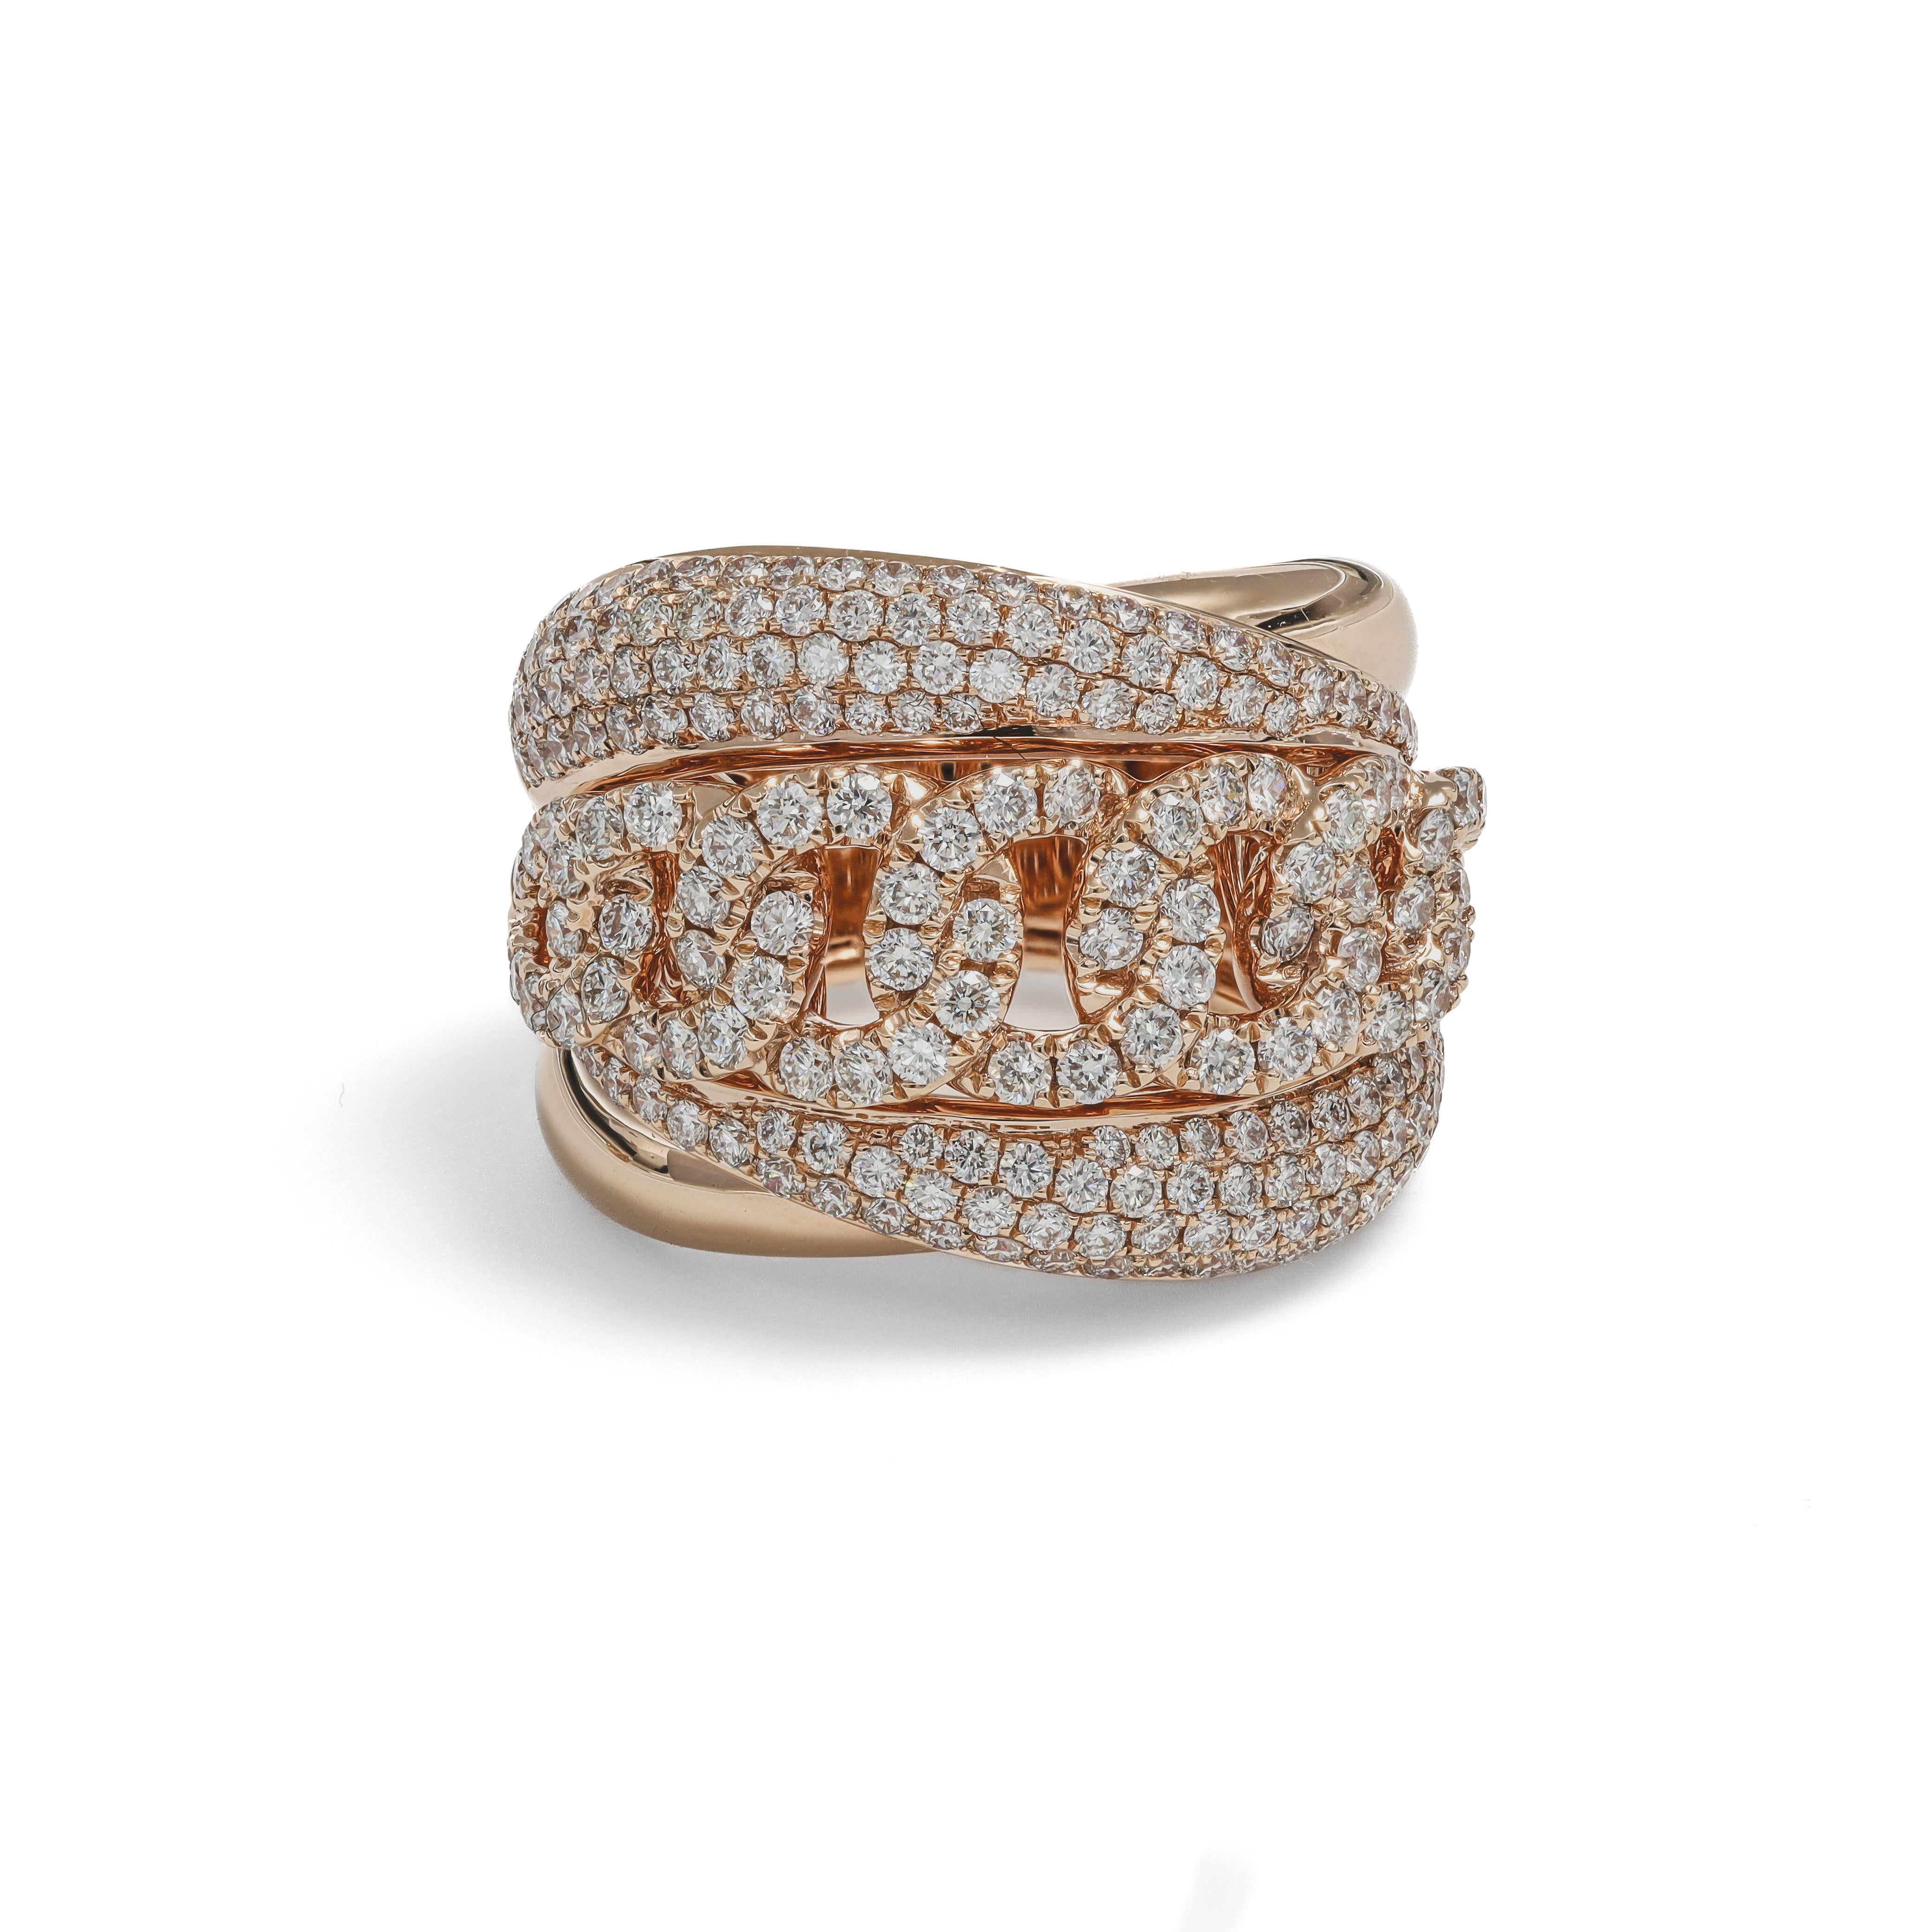 An extraordinary Cuban Link Pave Set Diamond Ring crafted in luxurious 18 KT rose gold. This ring is a true statement of opulence and refinement, boasting a remarkable total of 1.97 carats of dazzling diamonds.

At the heart of its allure lies our